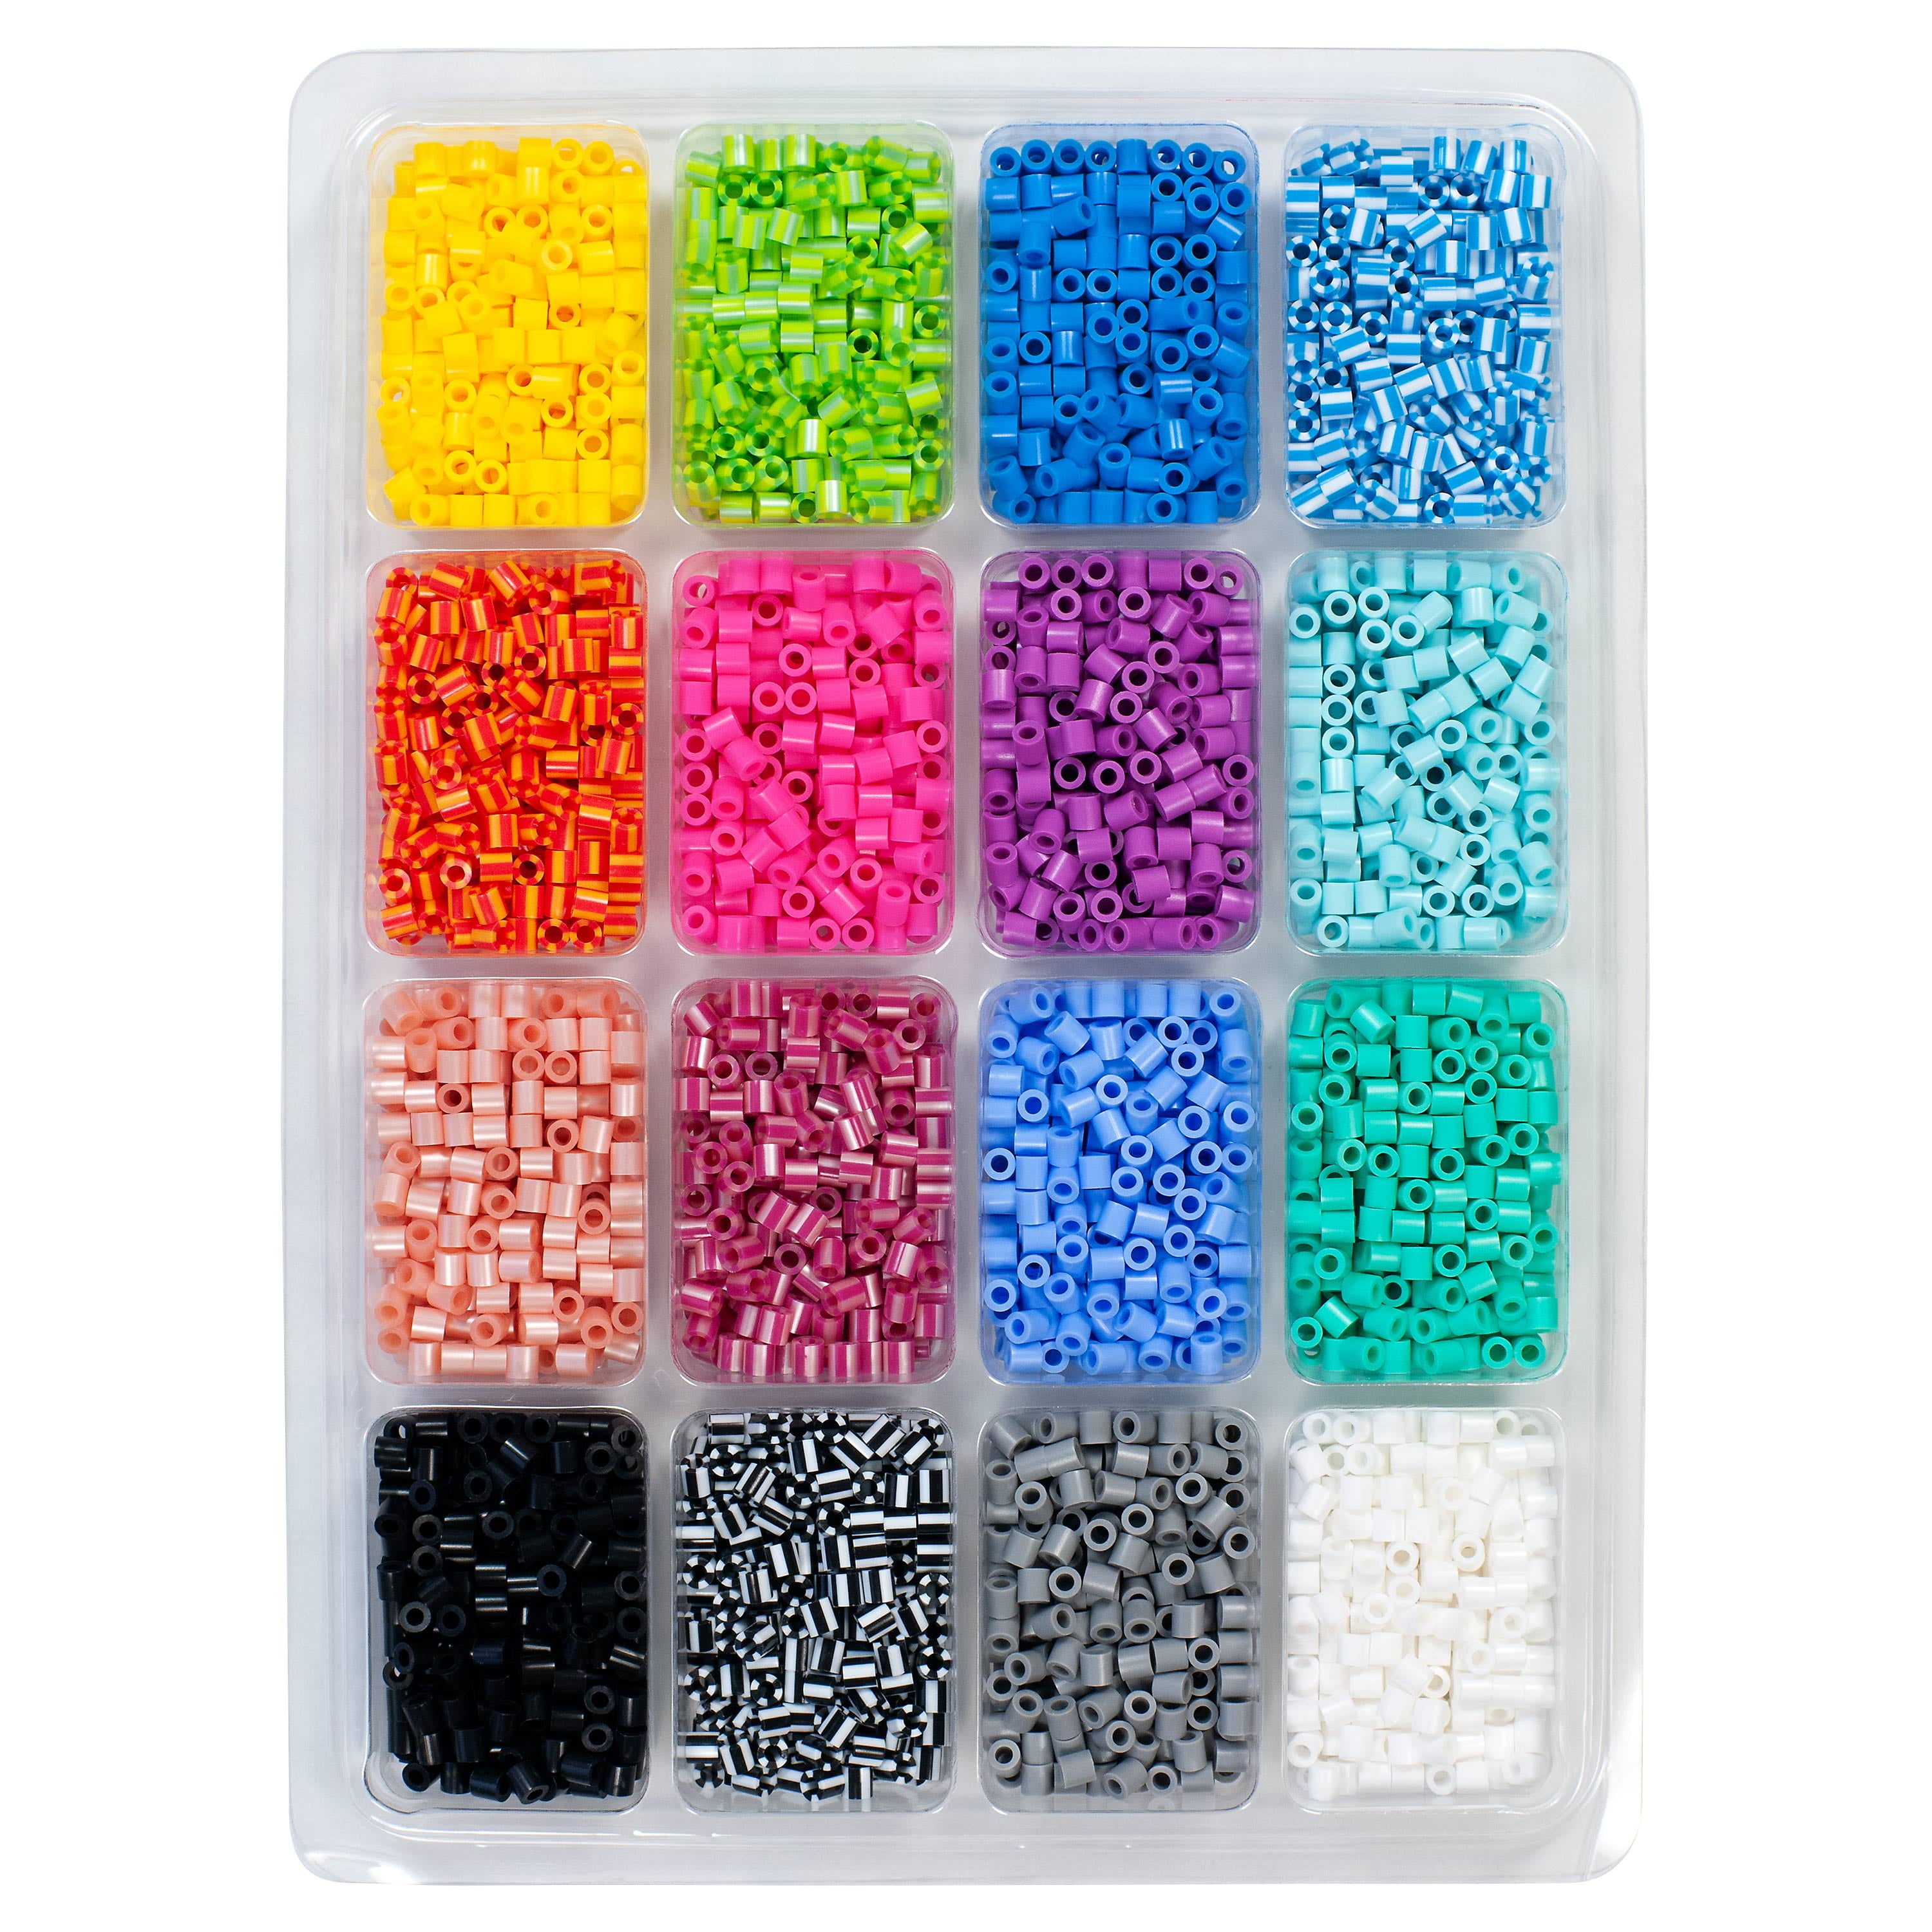 6 Pack: Perler Beads Tray of Beads, Size: 0.01 x 0.01 x 0.01, Assorted